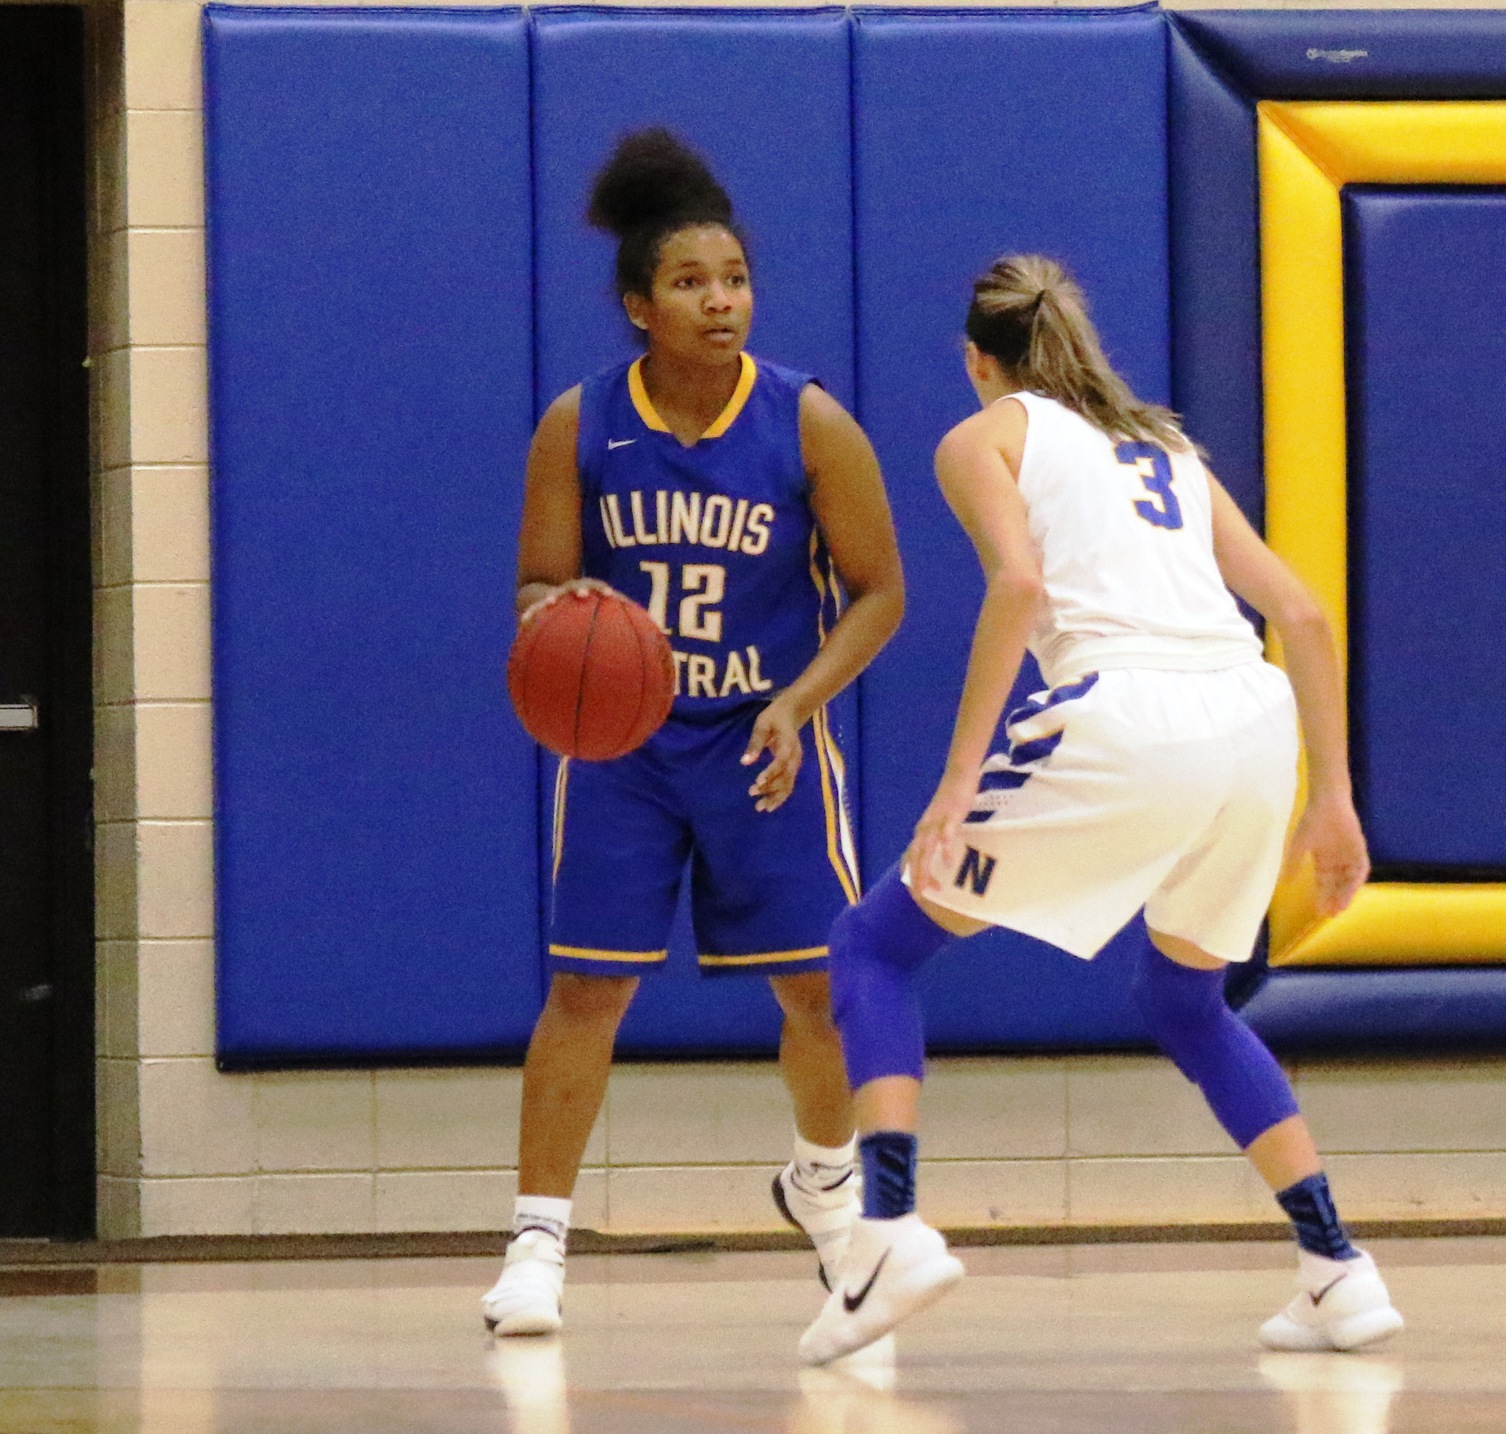 NIACC's Taylor Laabs defends during Friday's game against Illinois Central.